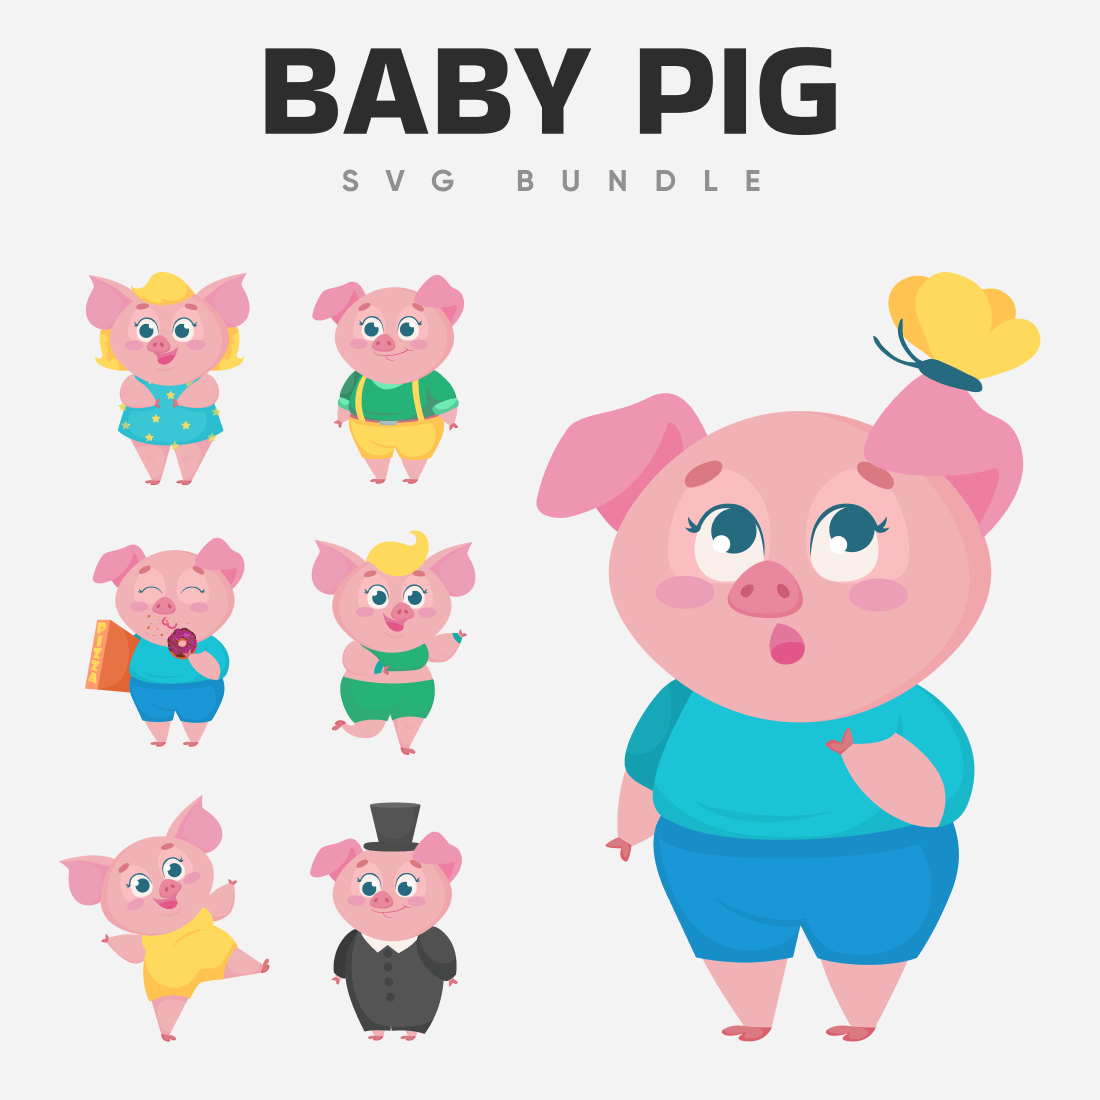 Cartoon pig with various poses and expressions.